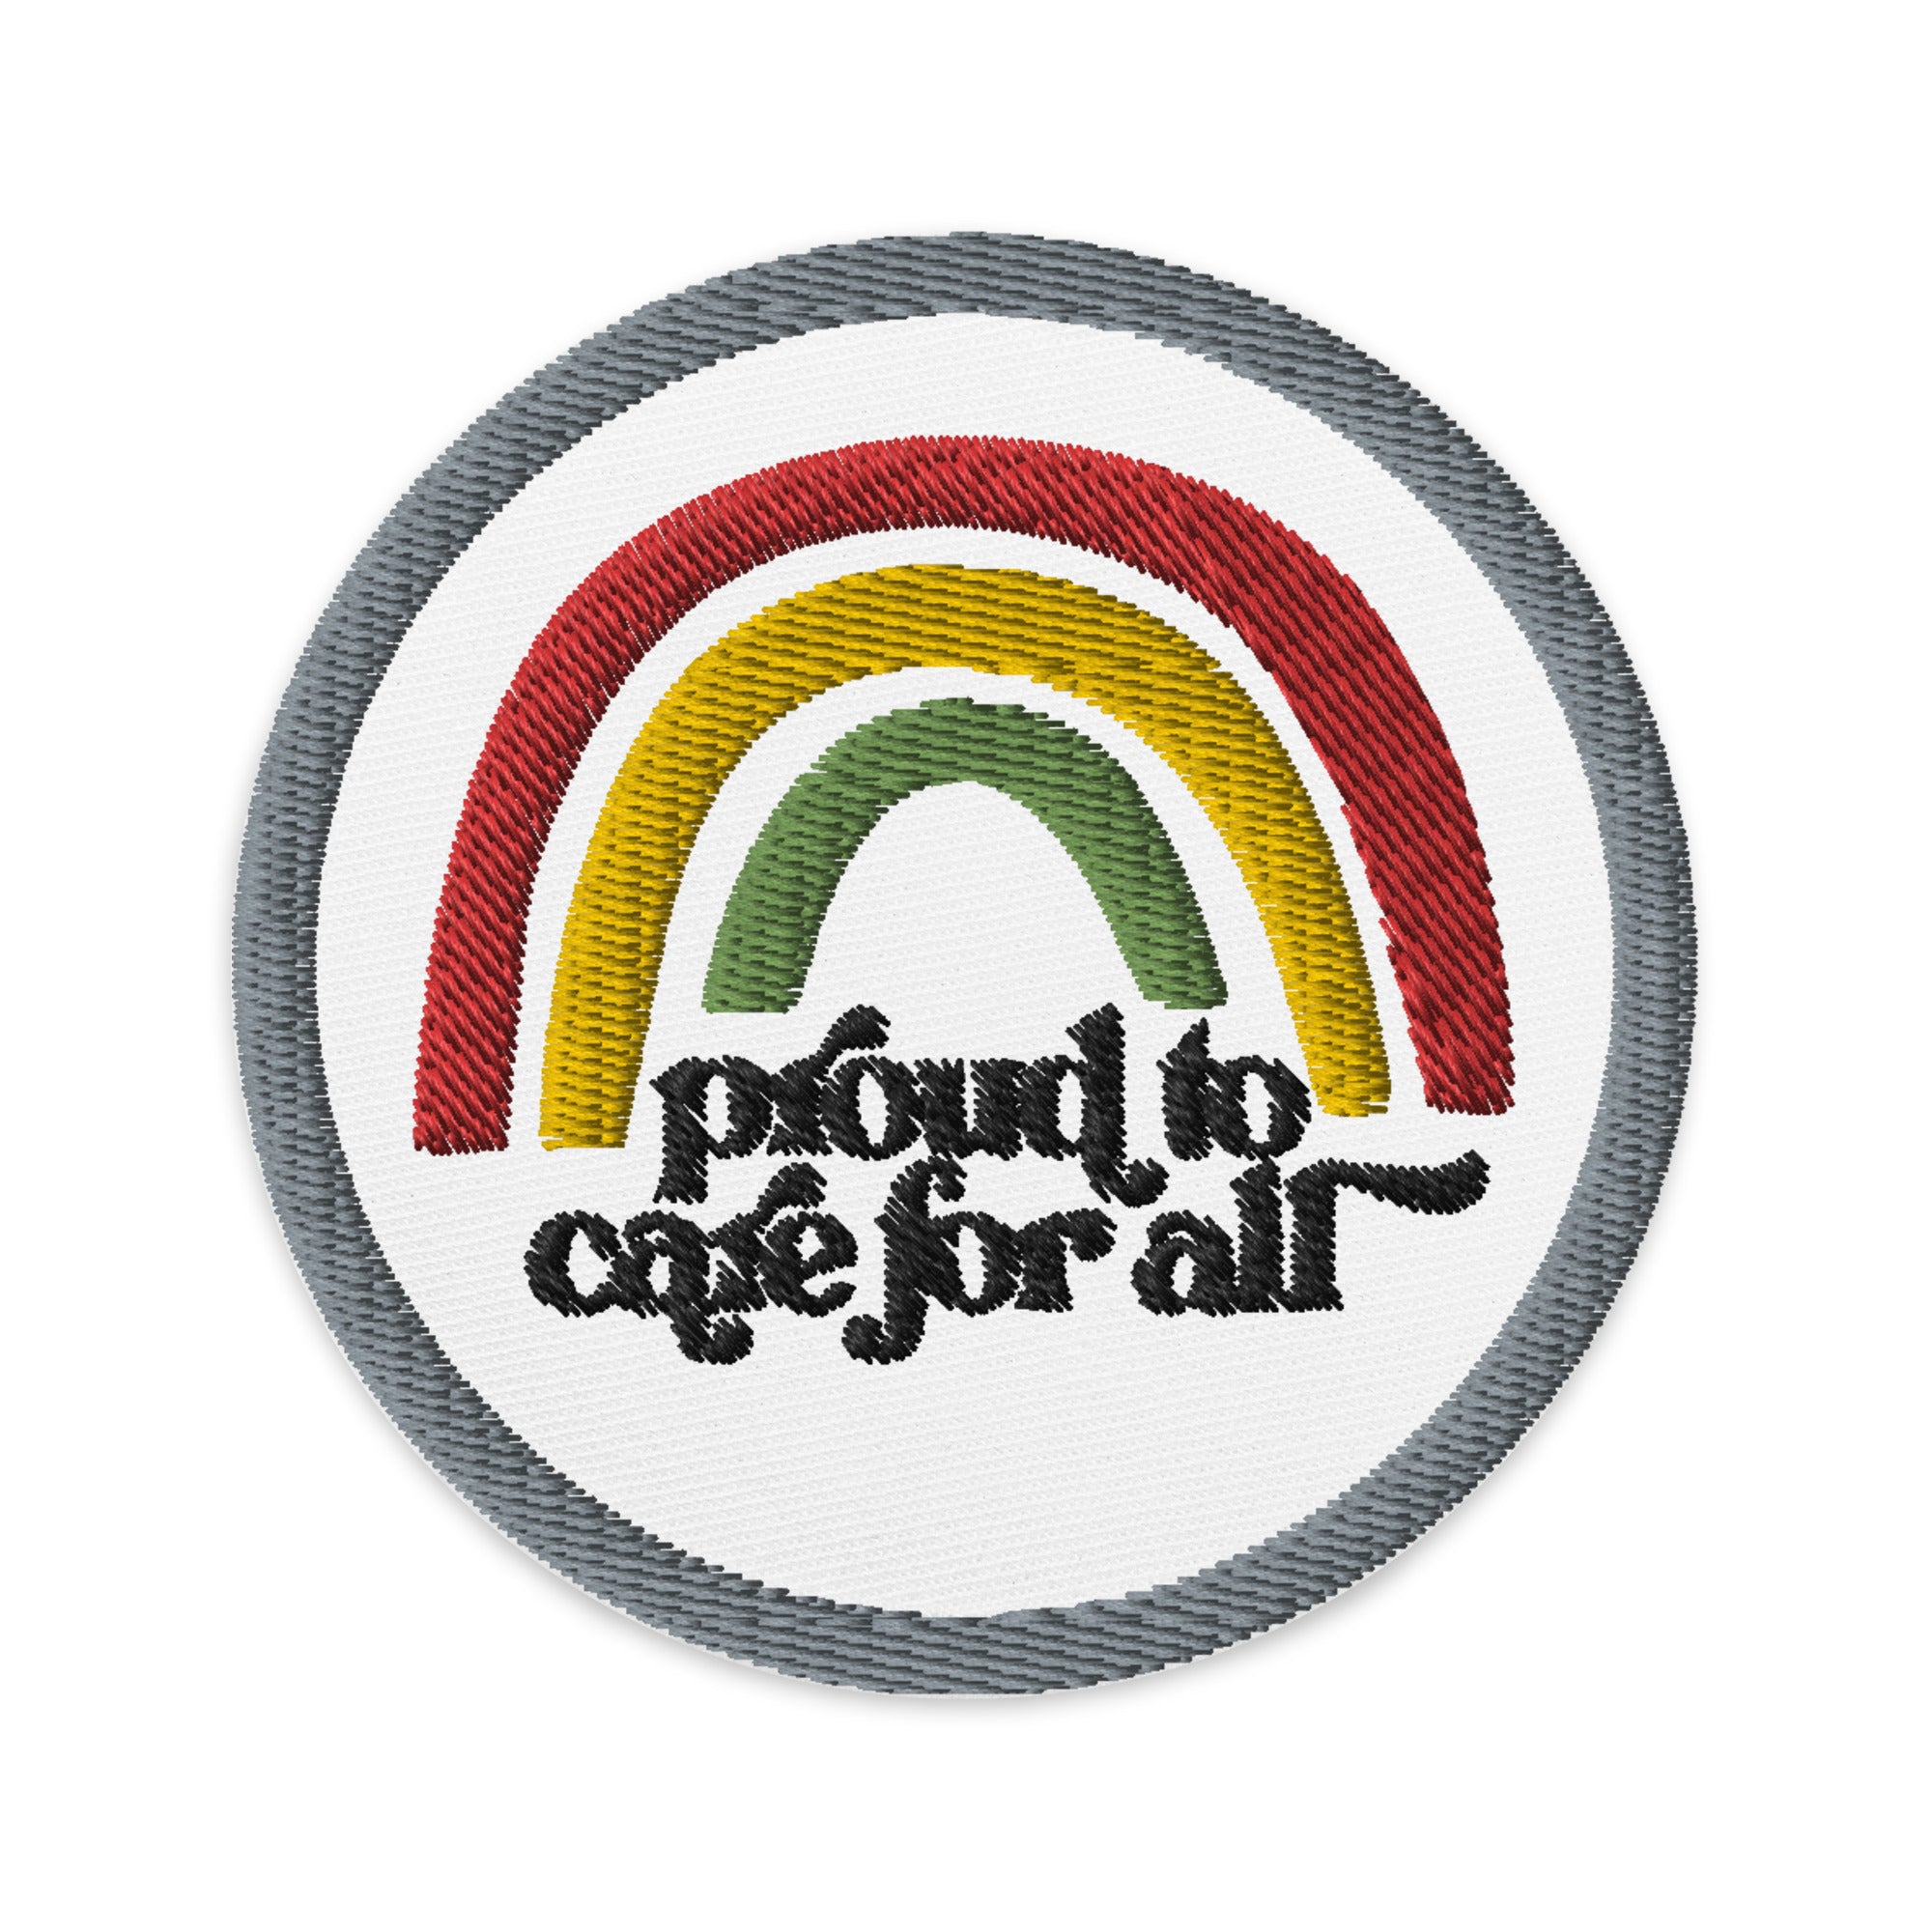 Proud to Care for All Patch